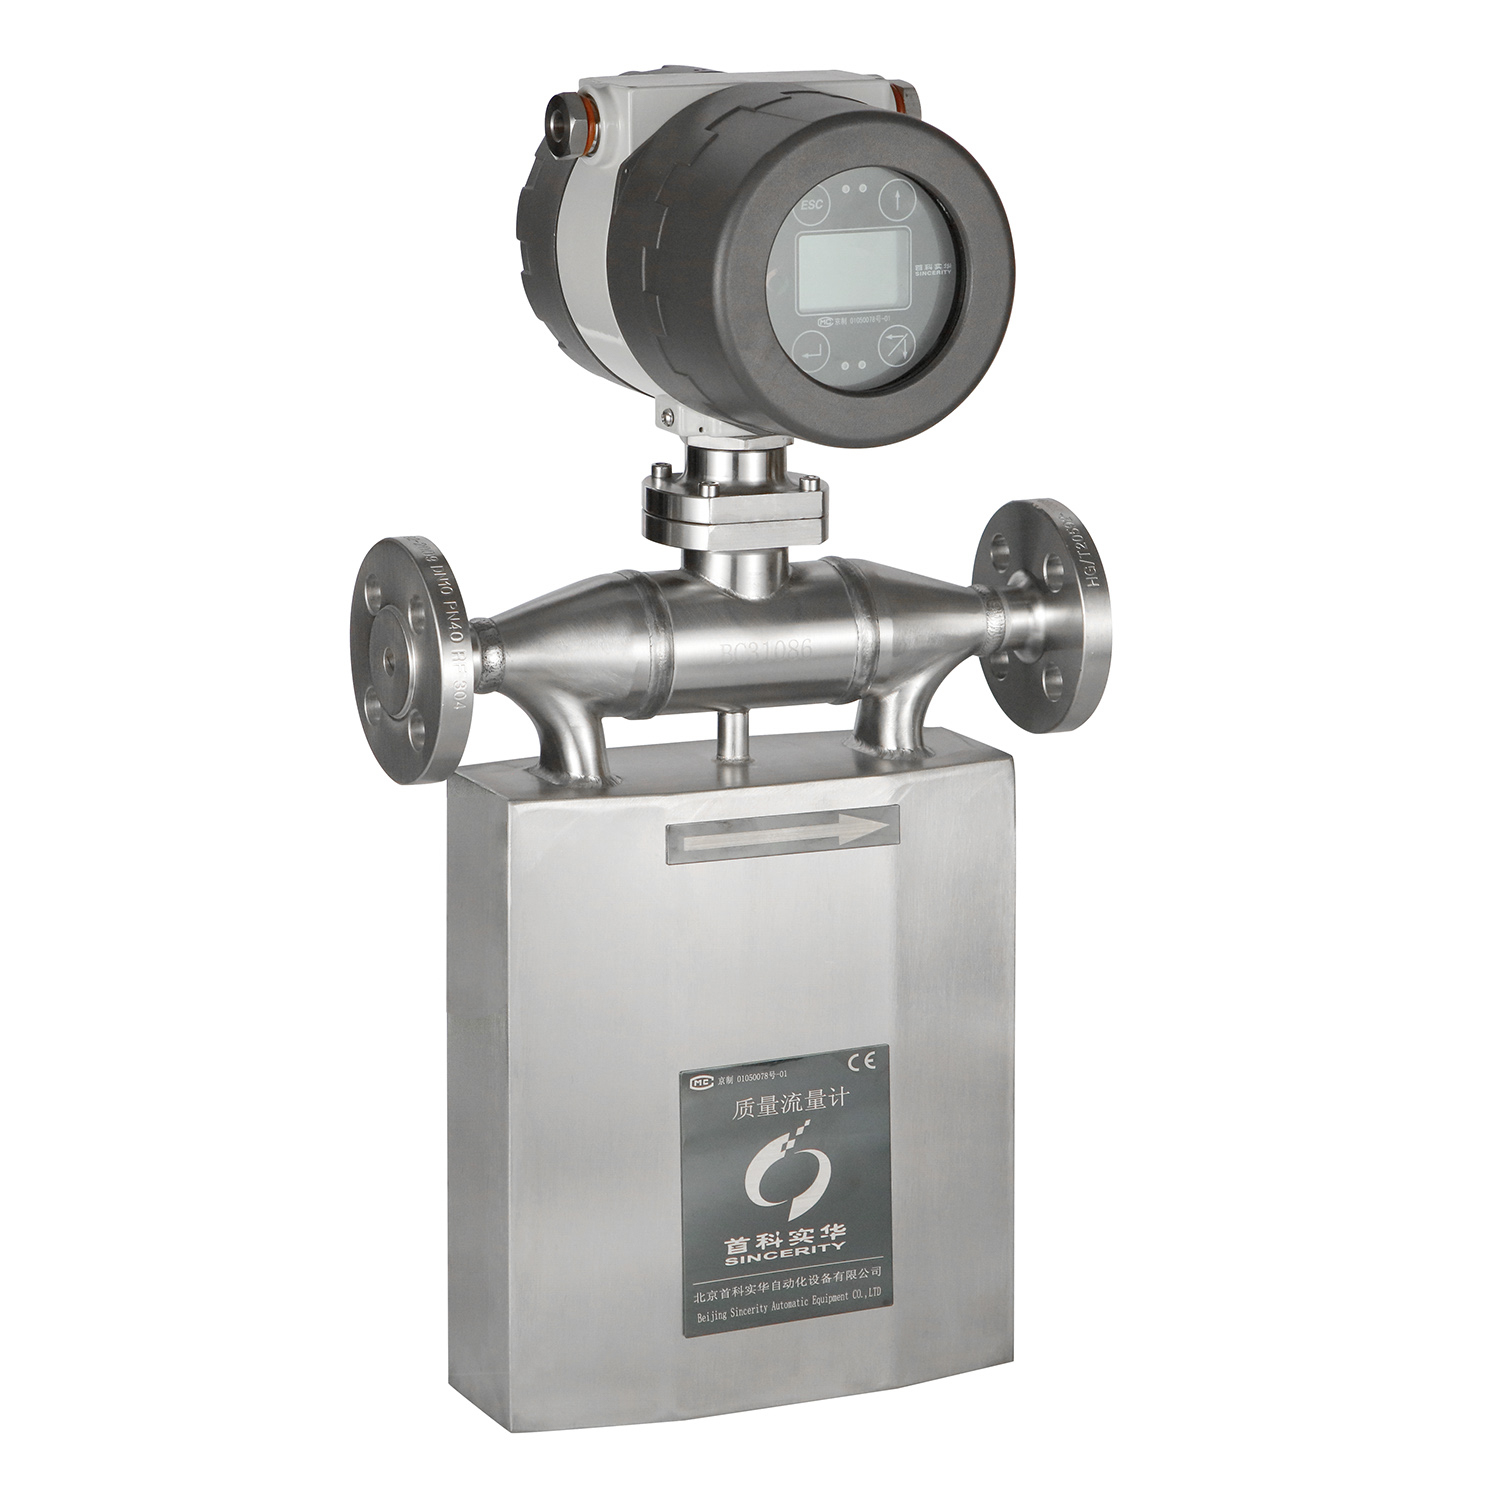 Sincerity sonic flow meter suppliers for chemicals-1